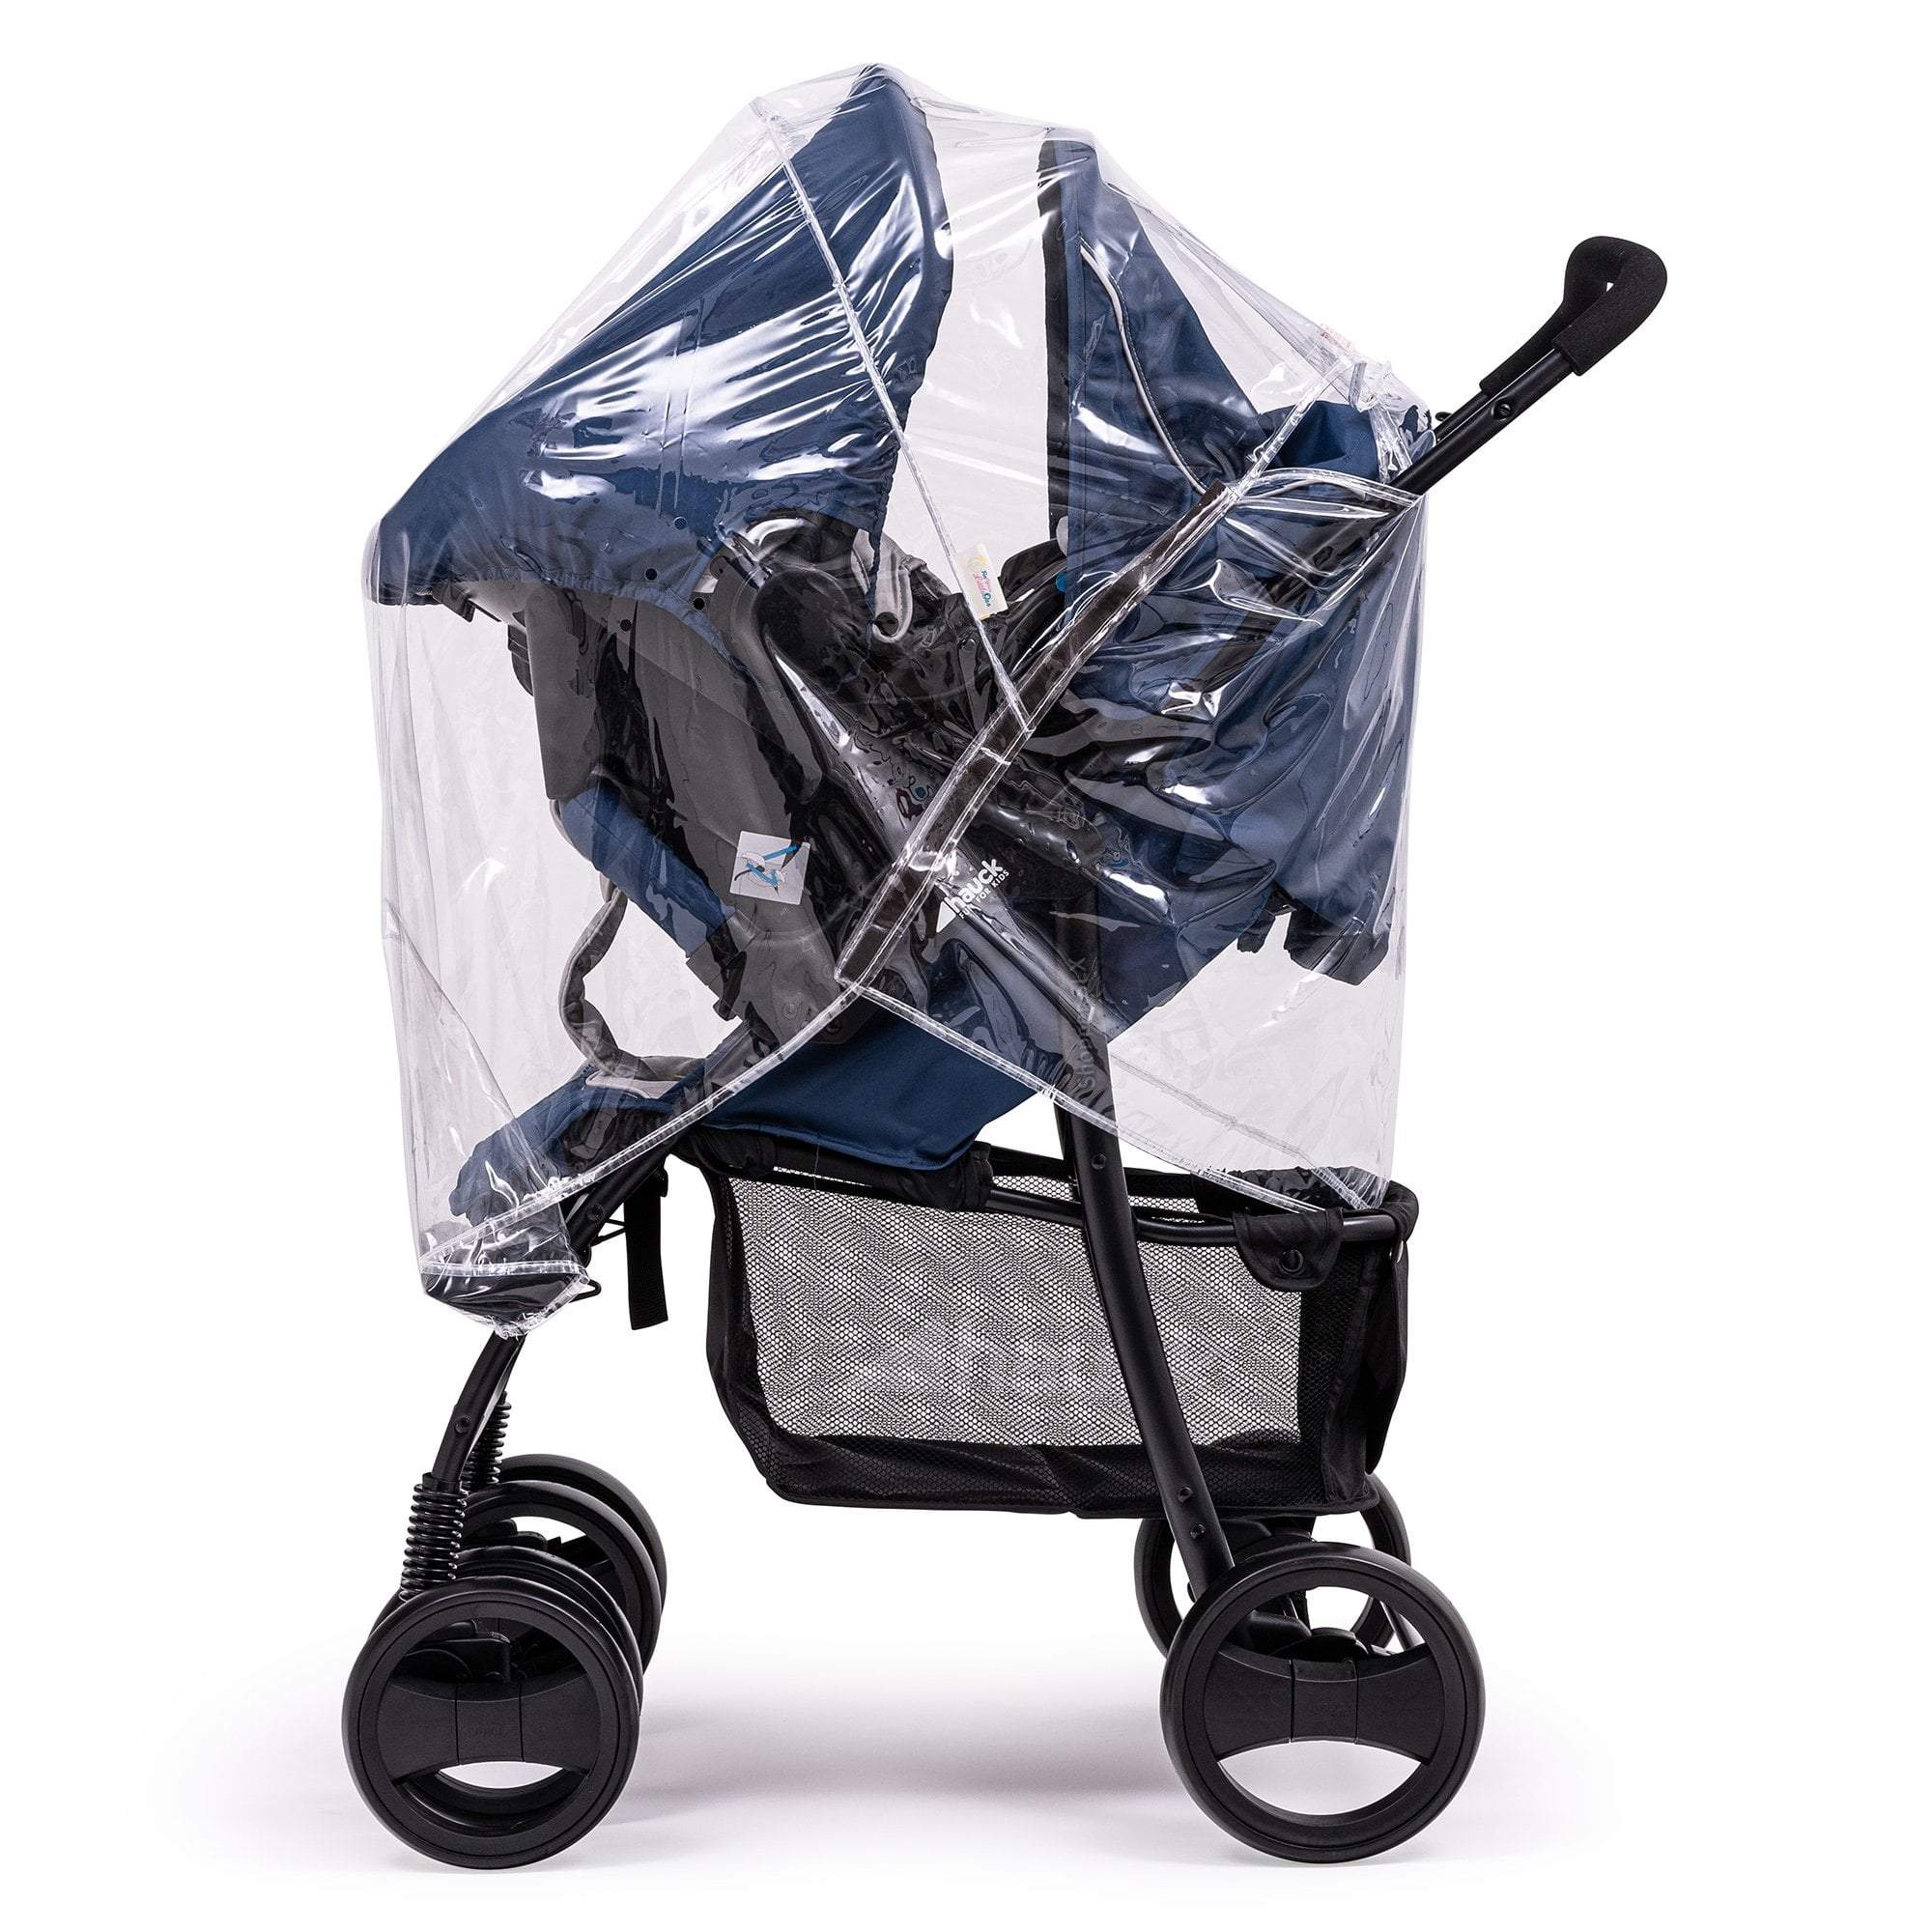 Travel System Raincover Compatible with Bugaboo - Fits All Models - For Your Little One